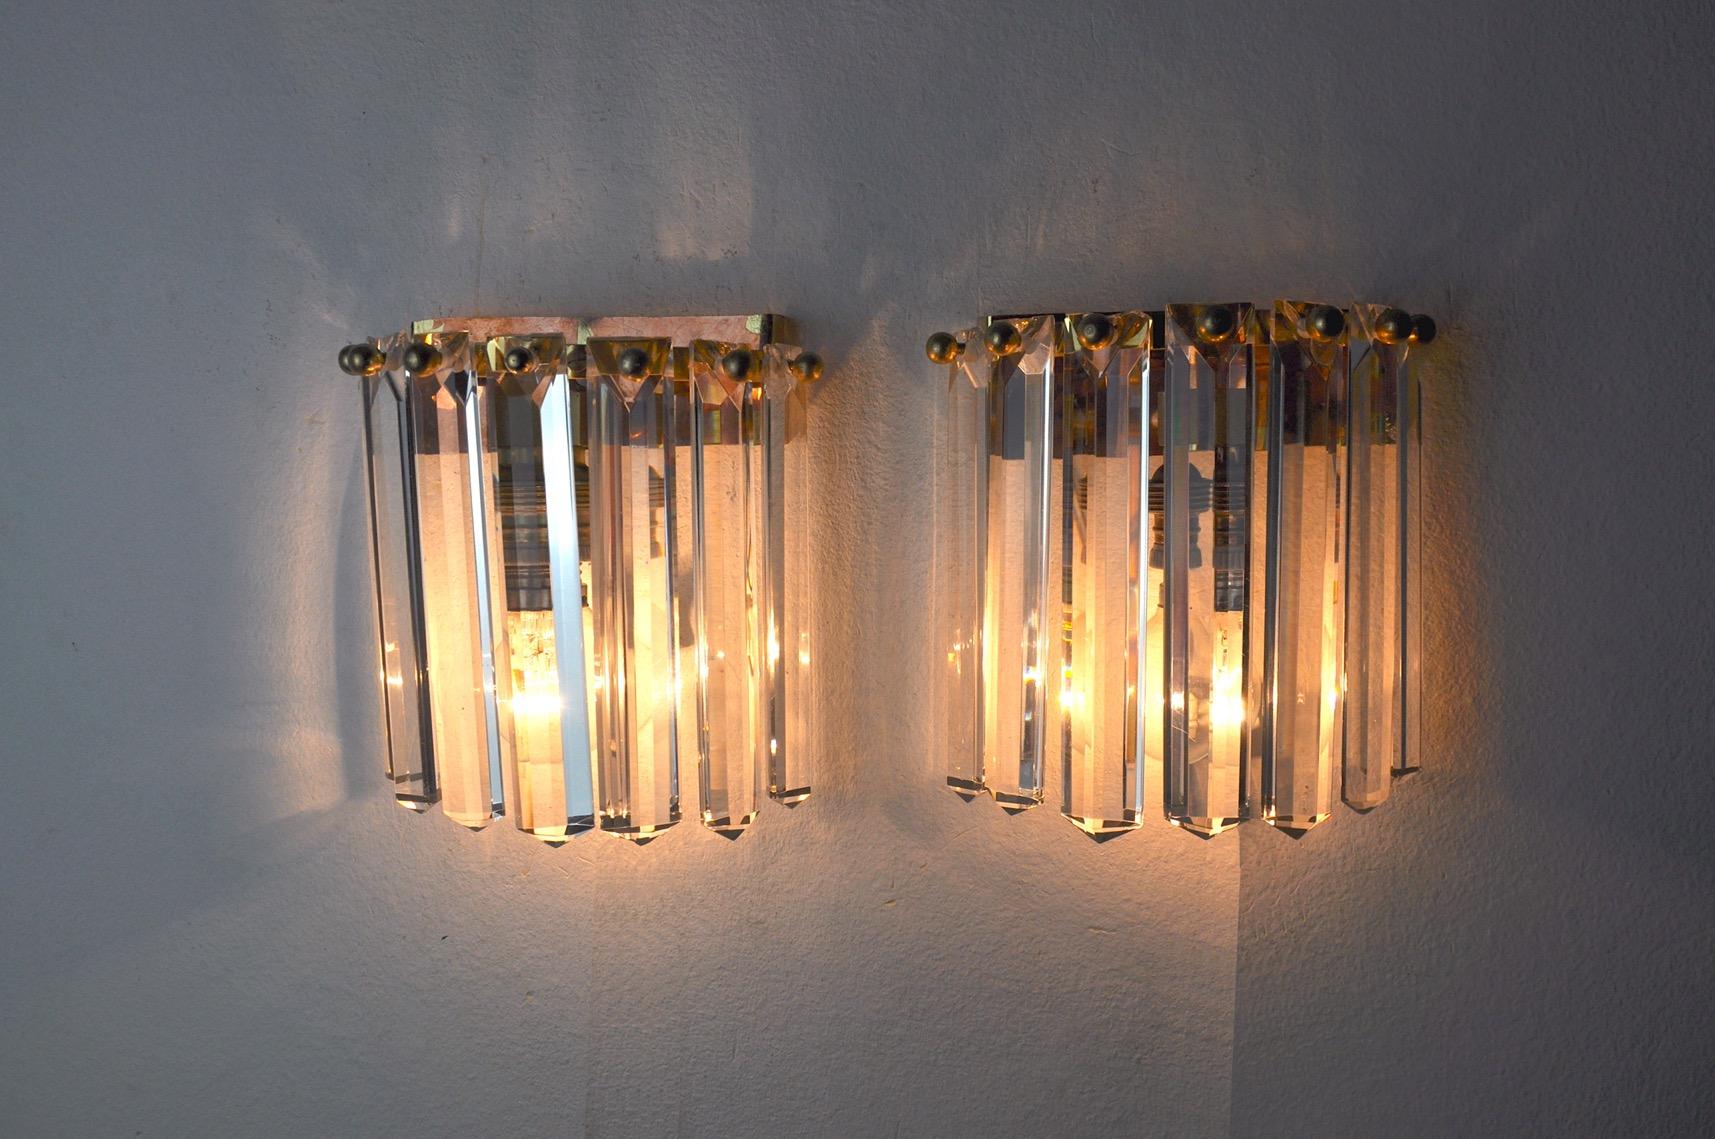 Beautiful pair of kinkeldey wall lamps designed and produced in germany in the 1970s.

Beautiful design object that will illuminate your interior perfectly.

Verified electricity, metal base cut in a non-linear way, not appreciable, time marks